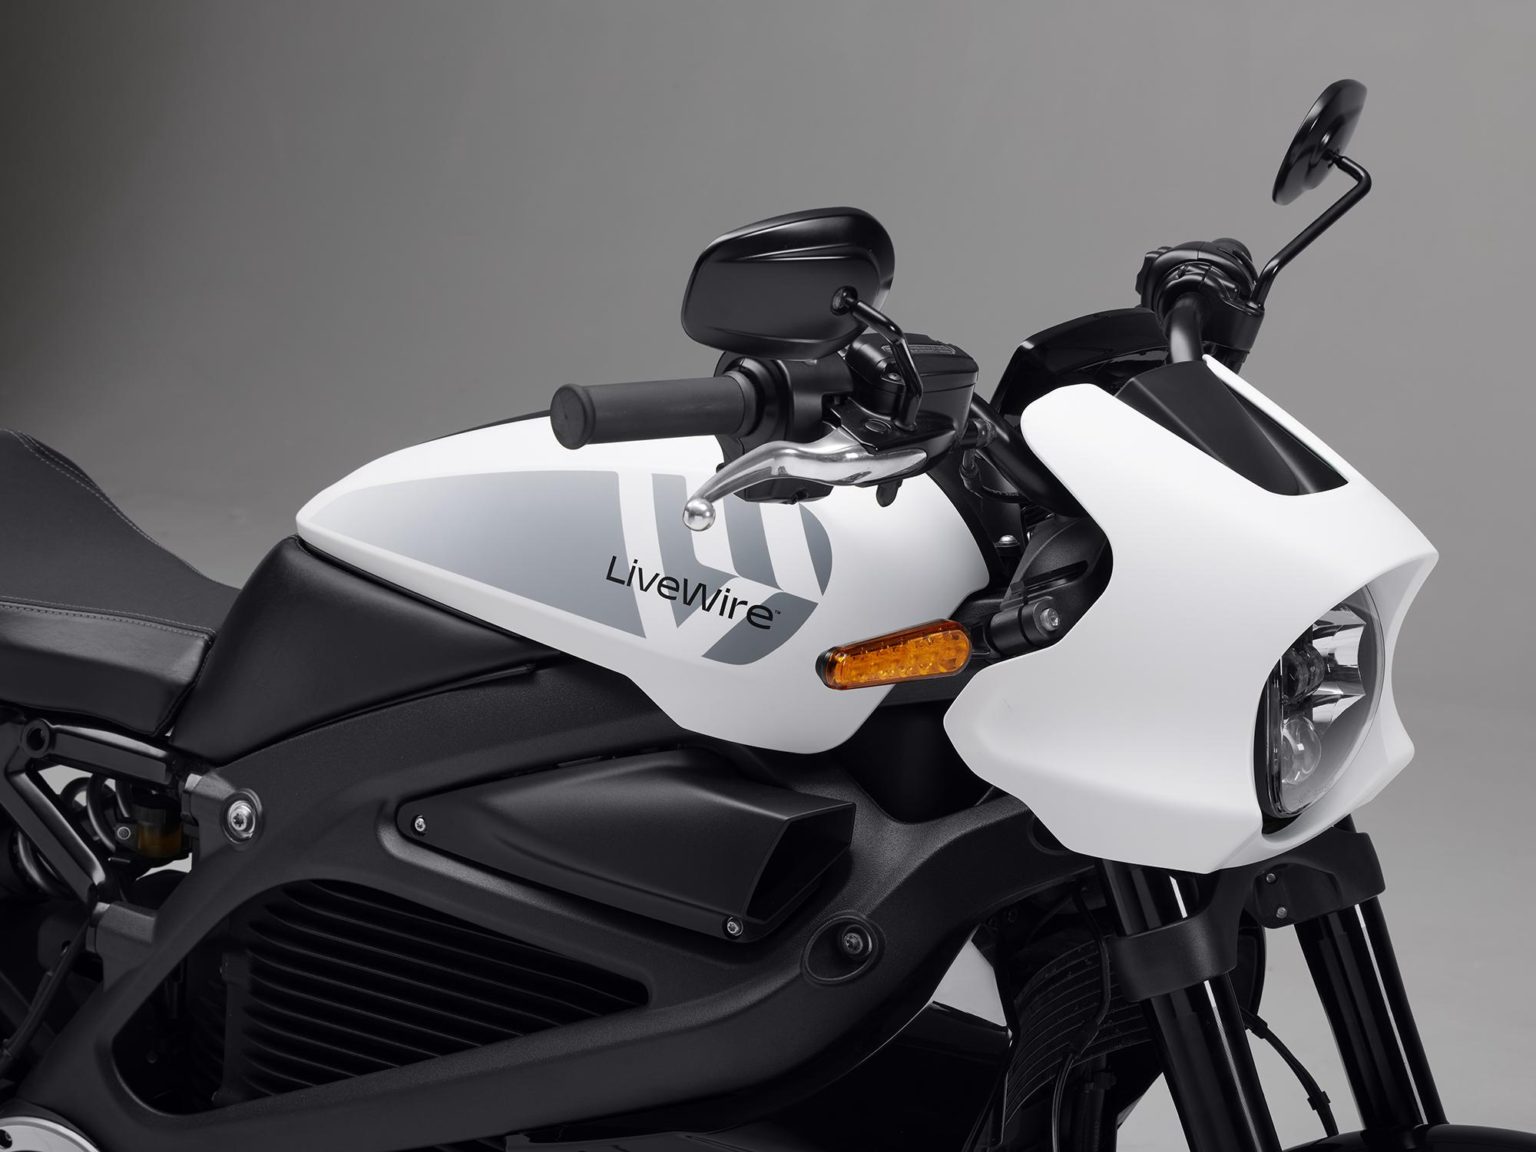 Harley-Davidson is making LiveWire its new electric vehicle brand.